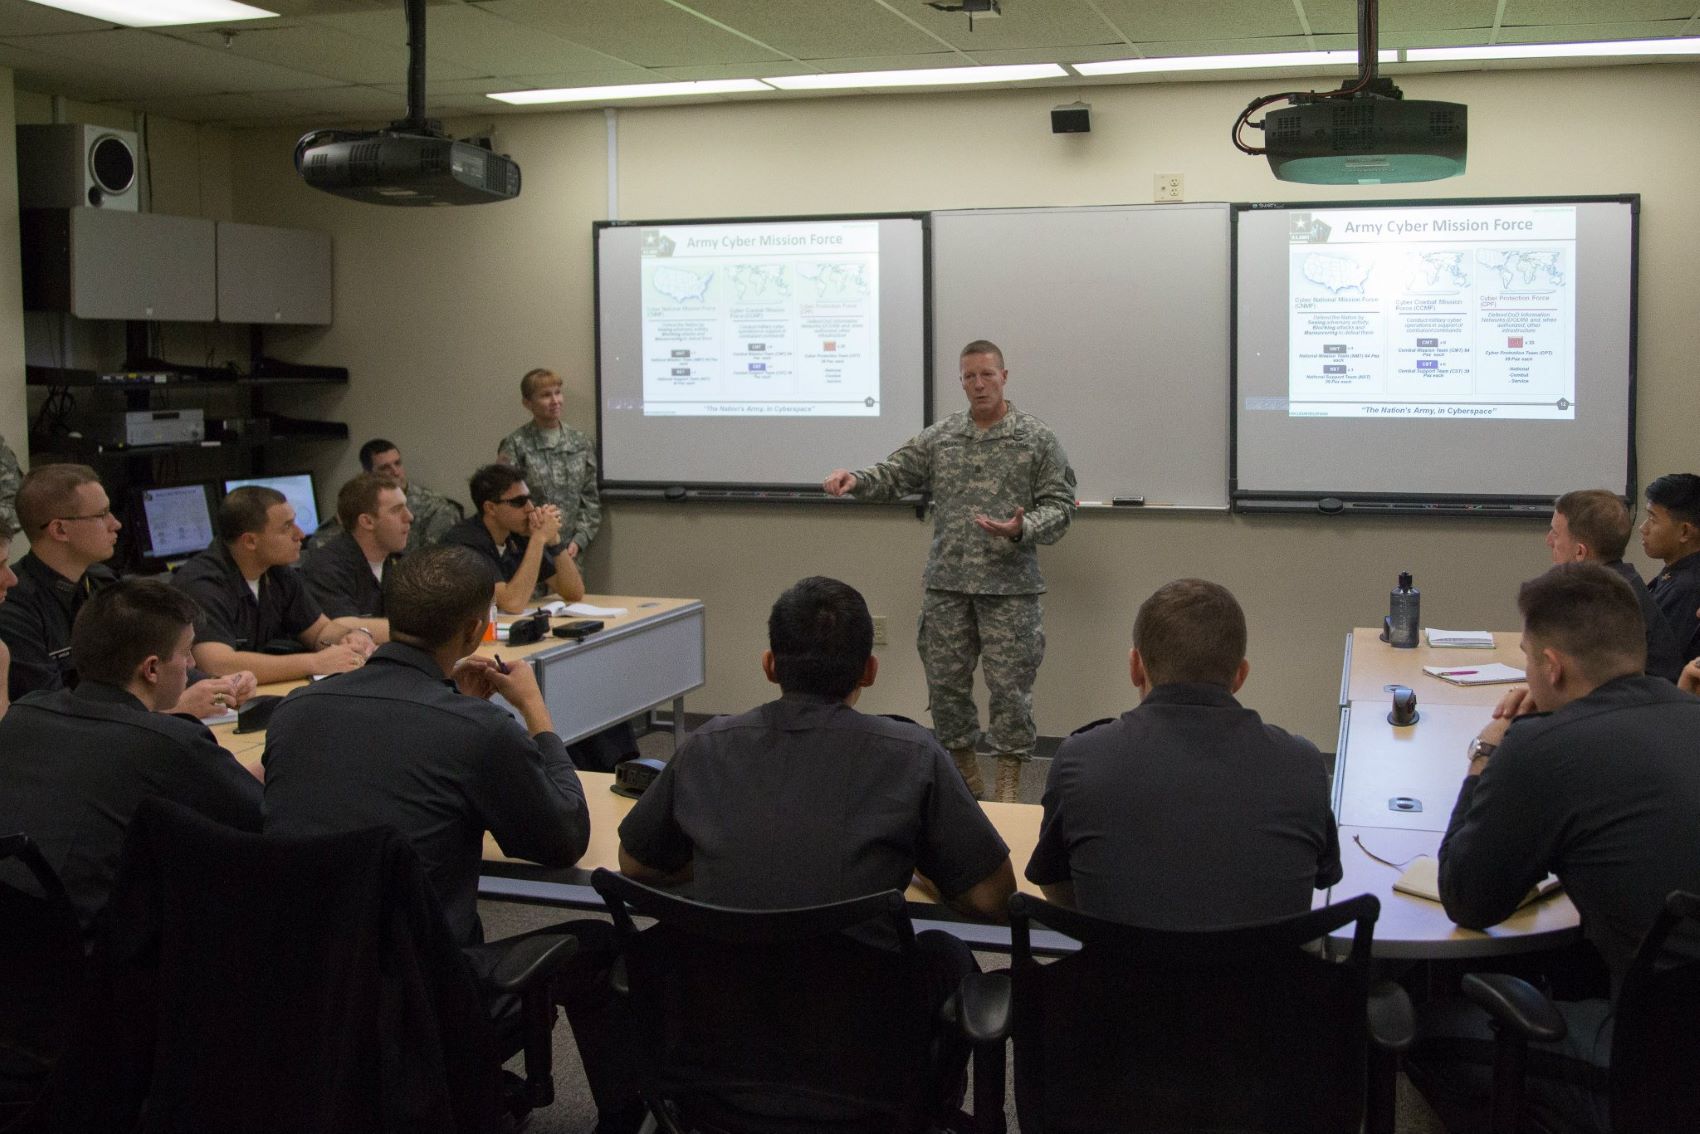 WestPoint students attend a cyber security lecture